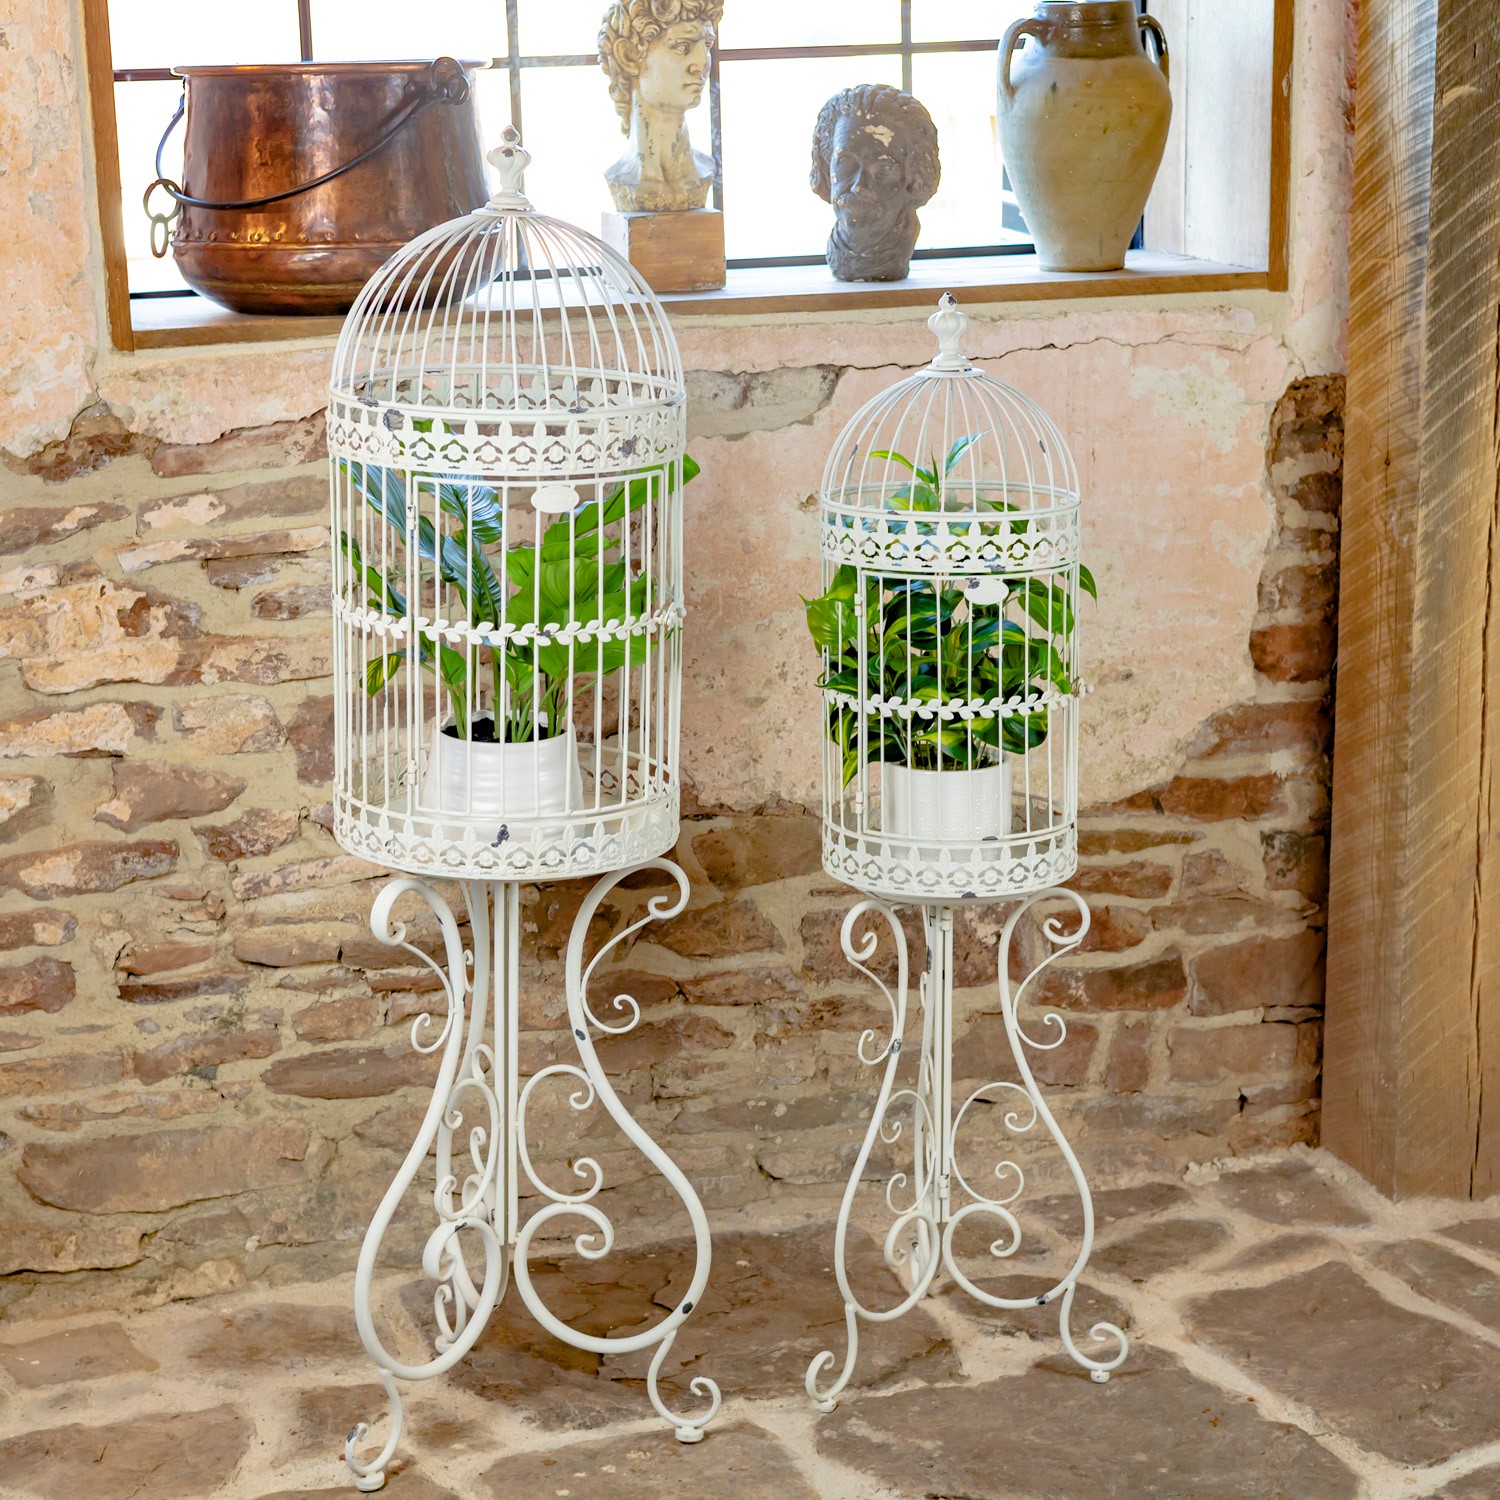 Set of 2 Victorian Style Metal Birdcage Planter Decorations in